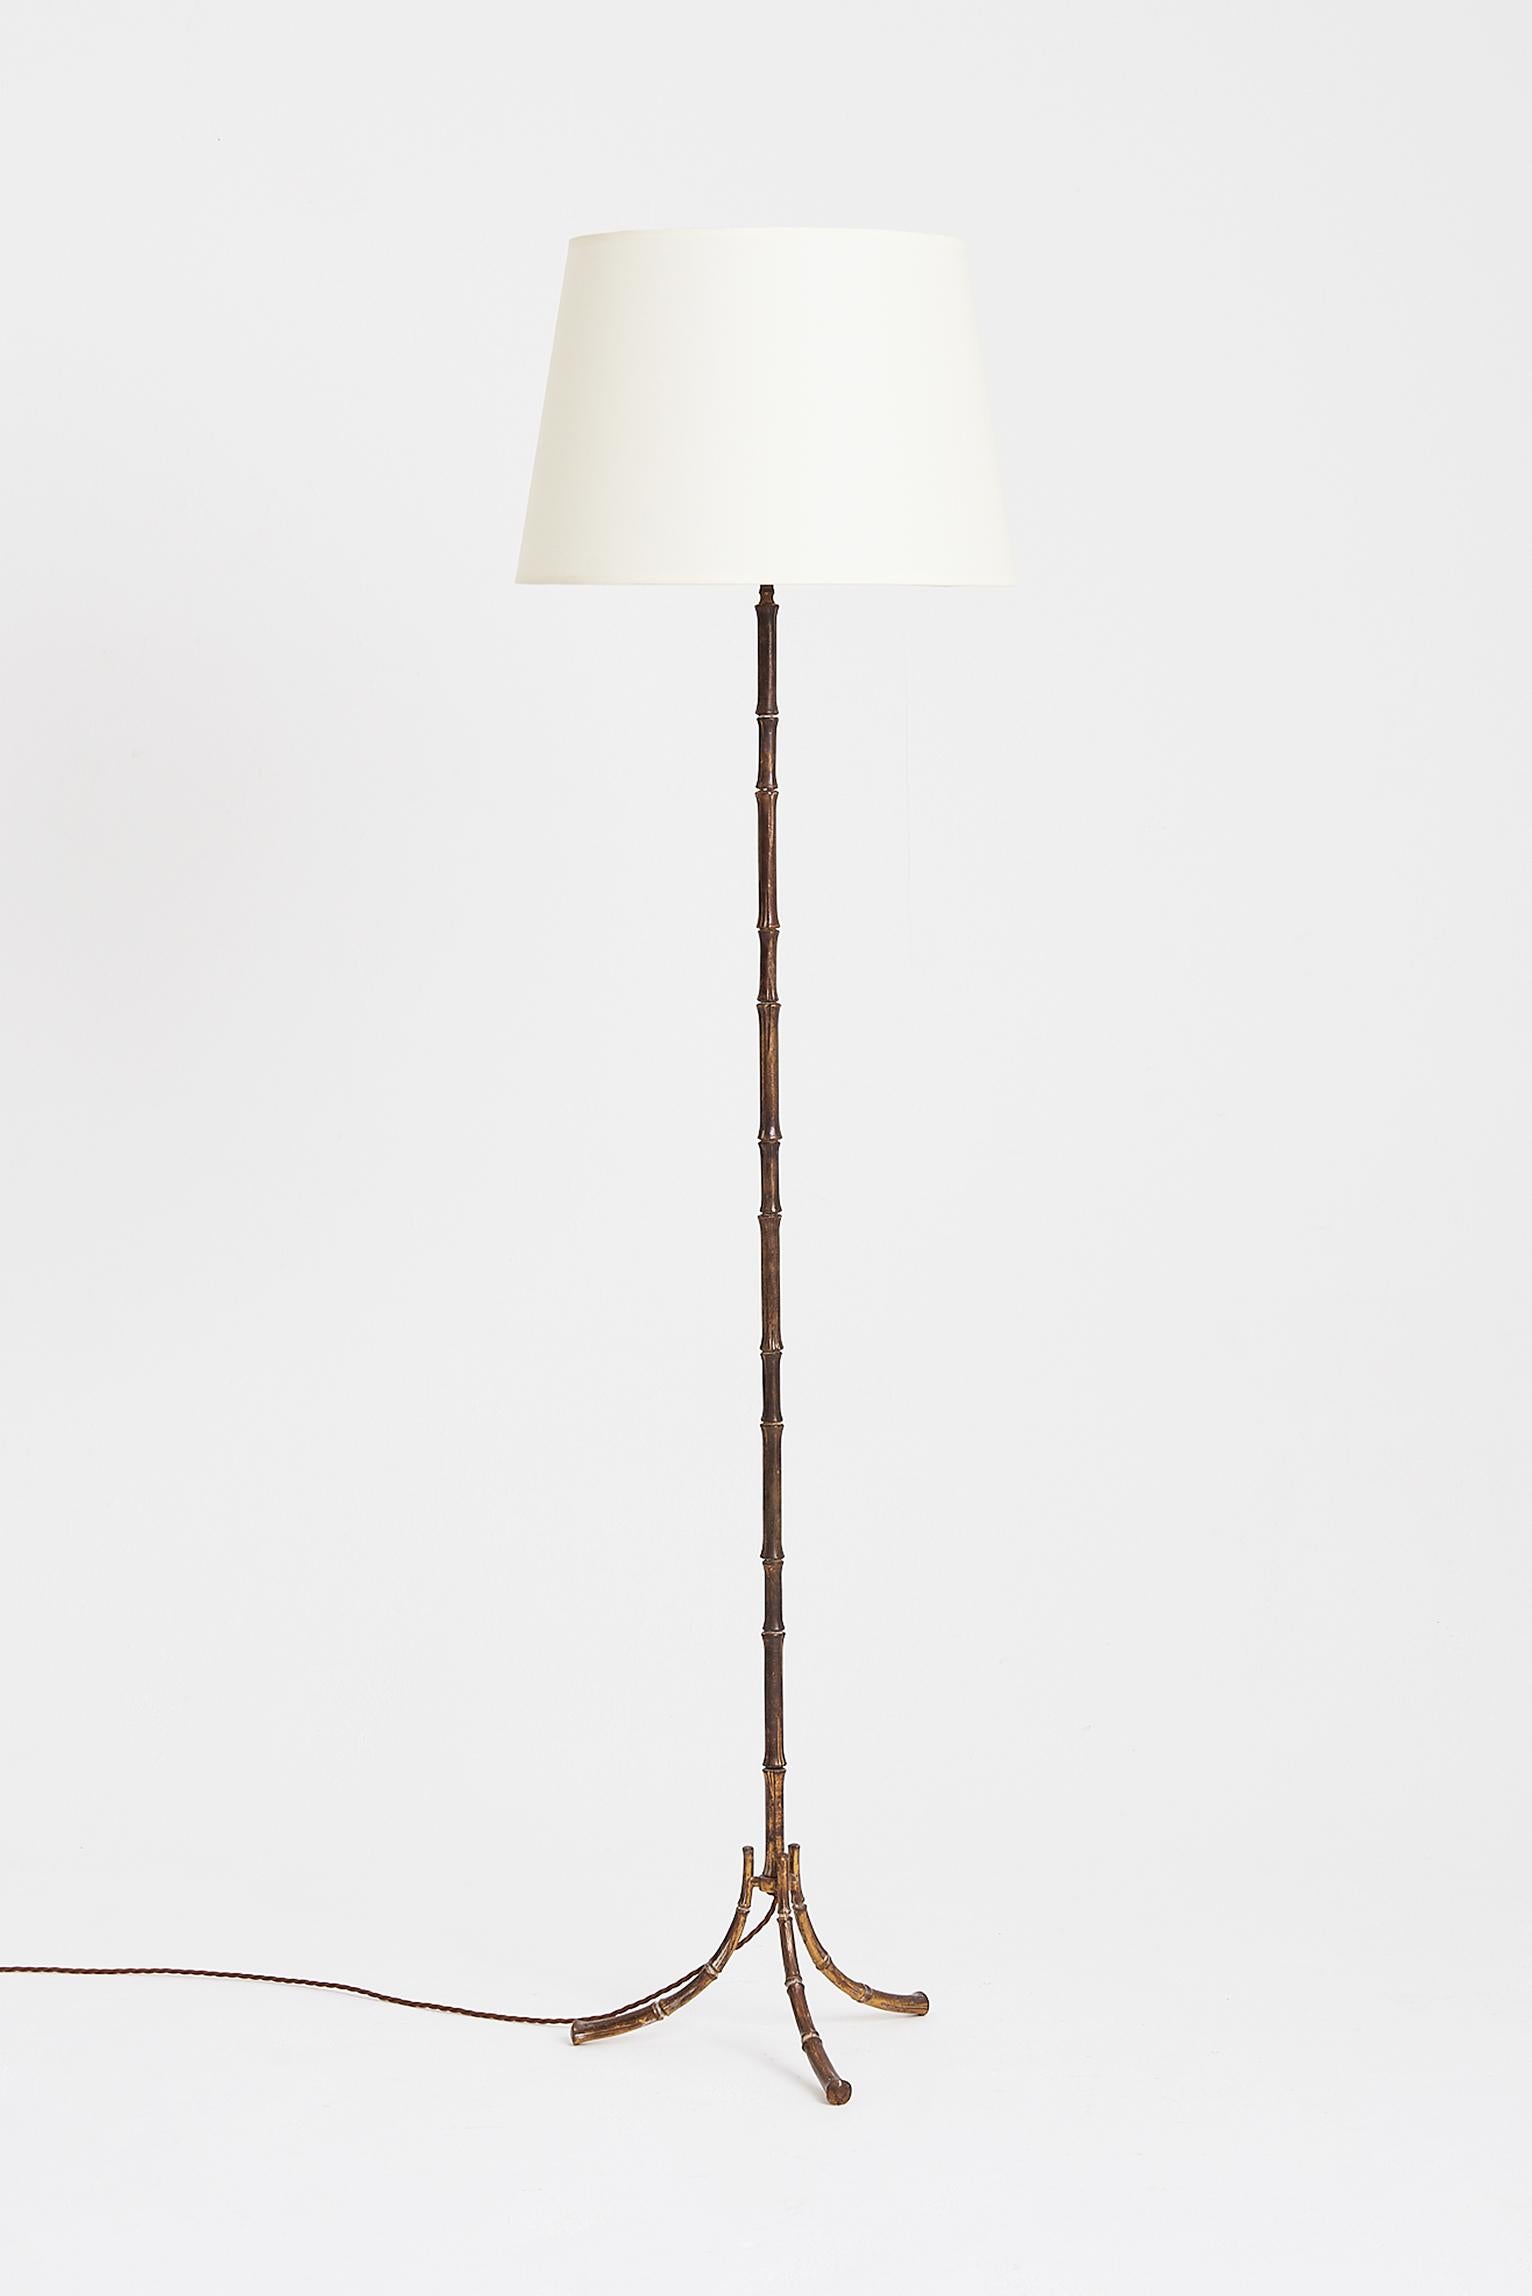 A bronze stylized bamboo floor lamp, probably by Maison Baguès.
France, circa 1950.
Measures: With the shade: 167 cm high by 46 cm diameter.
Lamp base only: 141 cm high by 40 cm diameter.